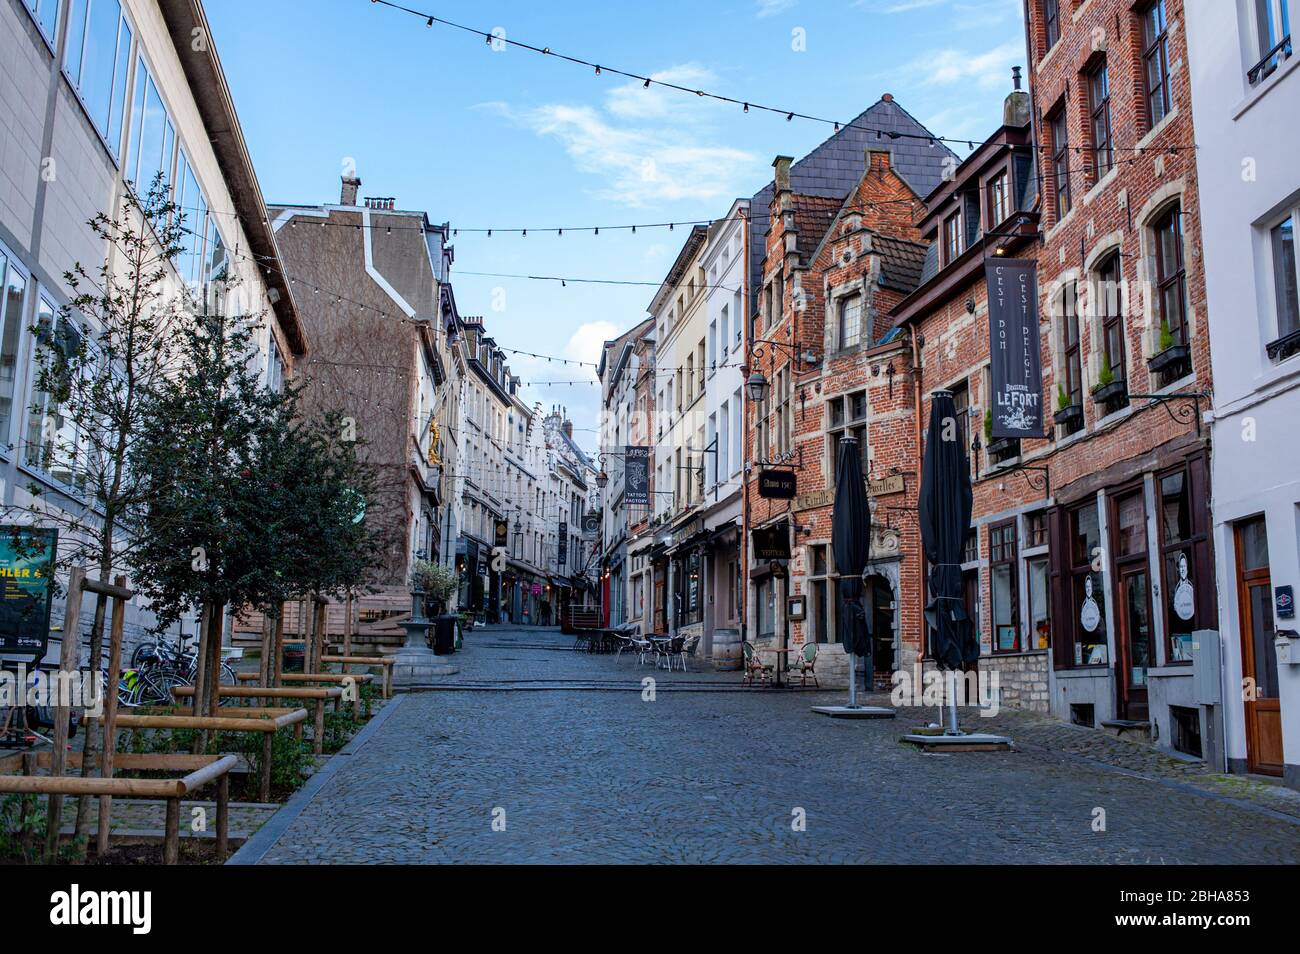 The lovely Rue de Rollebeck in Brussels. Brussels stock travel photographs by Pep Masip / Alamy Stock Photography. Stock Photo